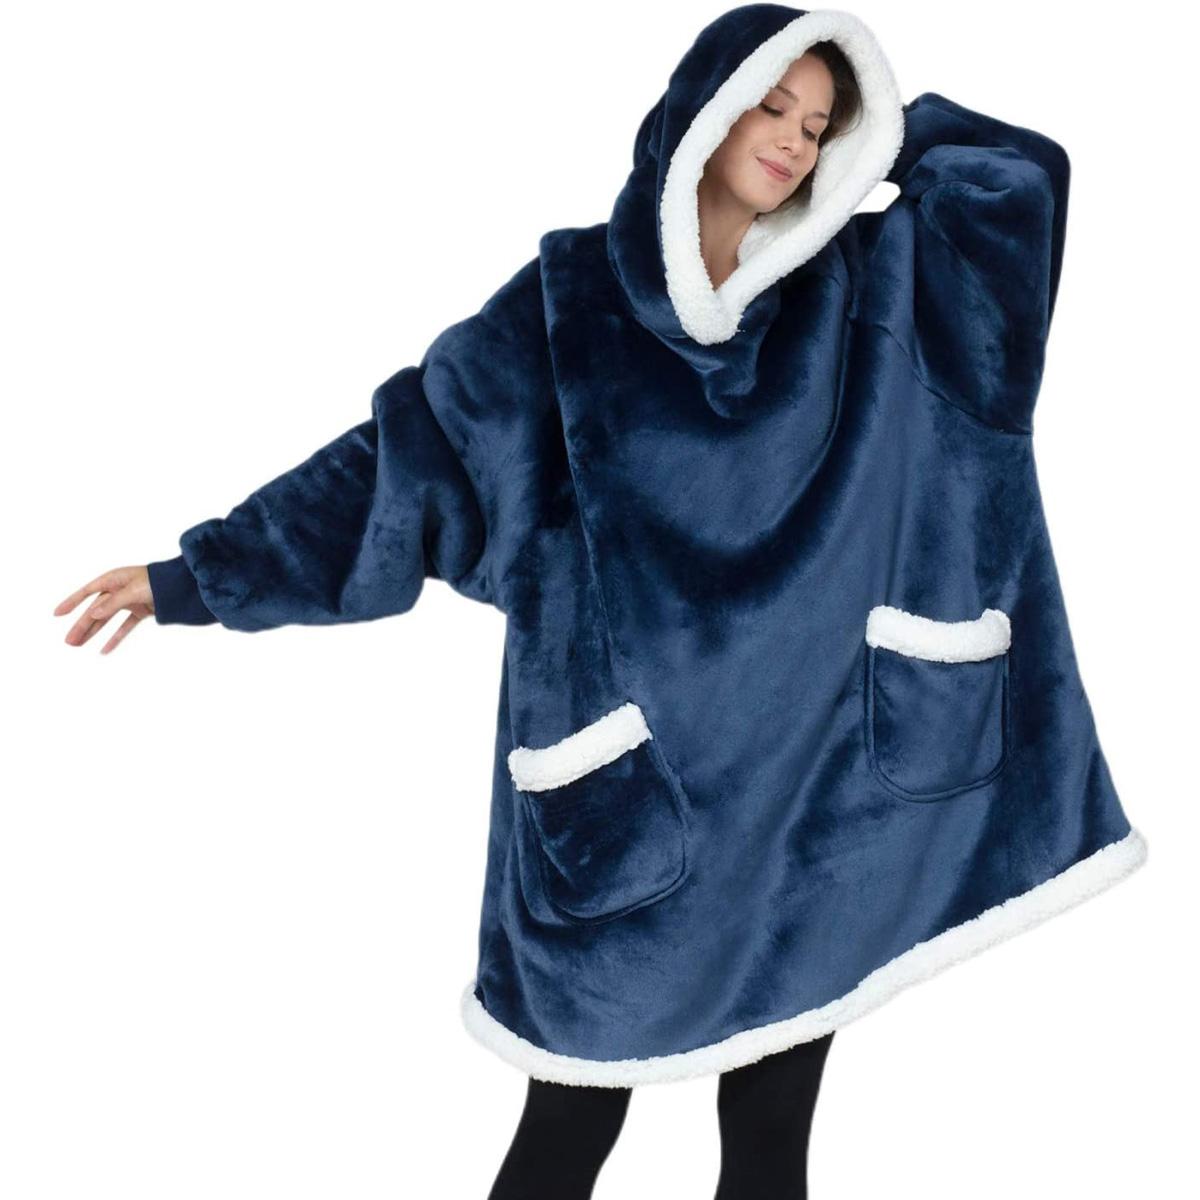 Bedsure Wearable Sherpa Blanket Hoodie for $25.79 Shipped